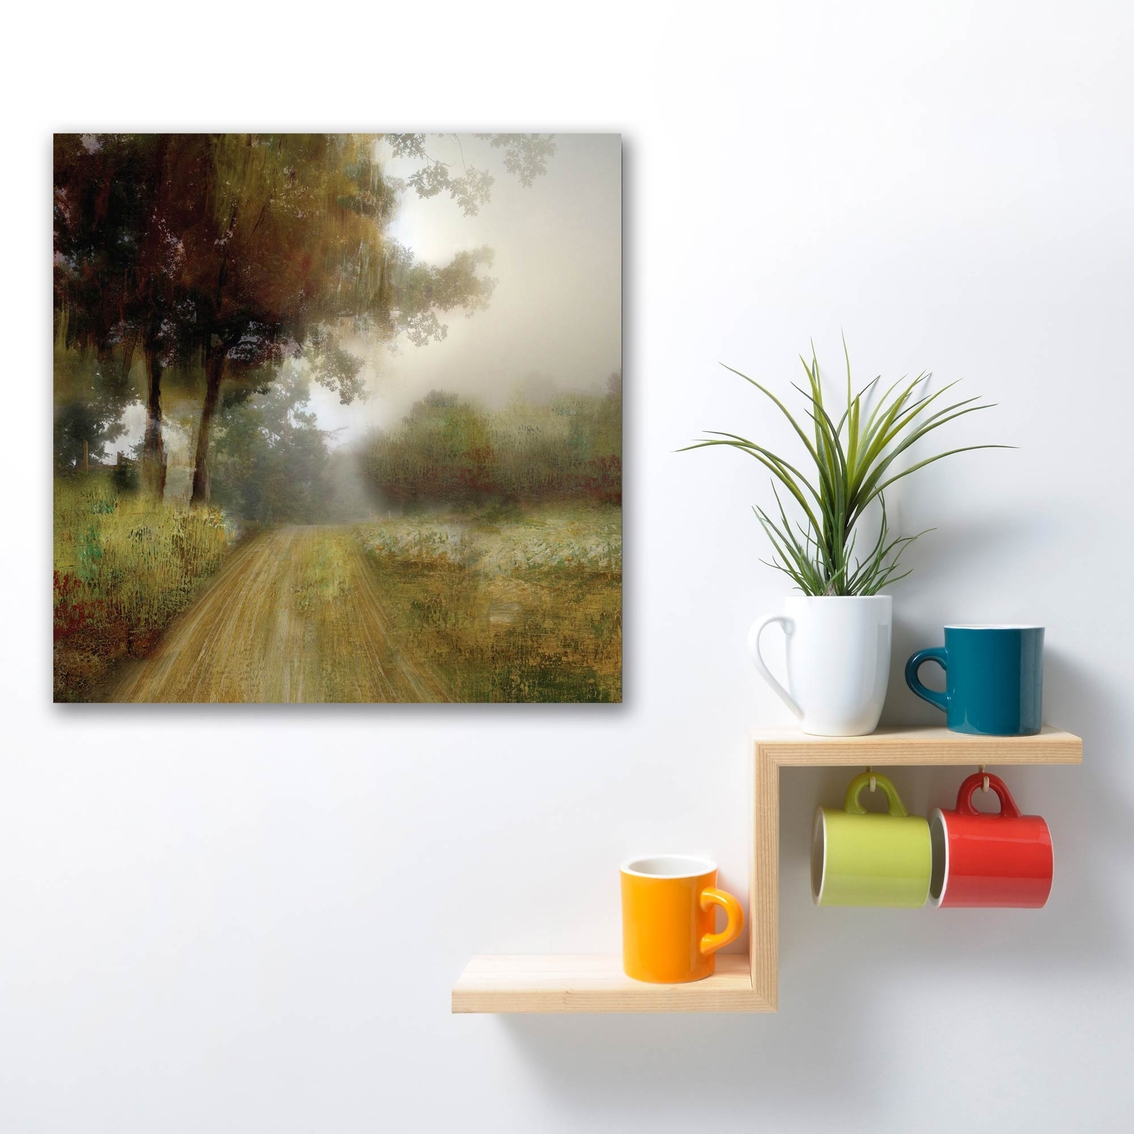 Courtside Market Country Road Canvas Wall Art - Image 4 of 7